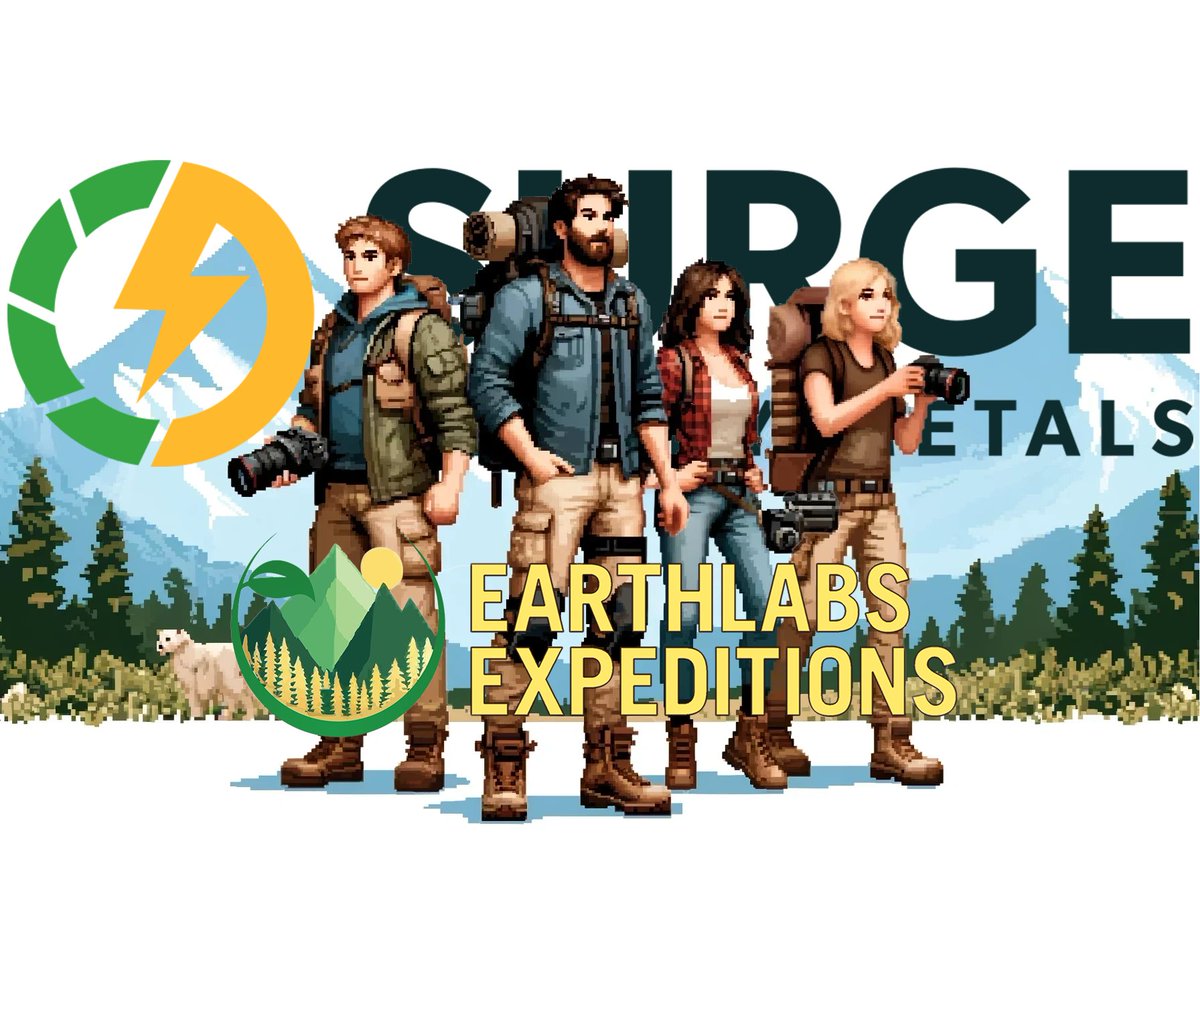 We’re happy to announce our first-ever Expedition! We will be travelling to Nevada on May 27th to visit @SurgeBattery #TSXV : $NILI Follow along for updates, and reach out to us if you have any comments or questions that we can pass along to the Surge team! GO NILI!